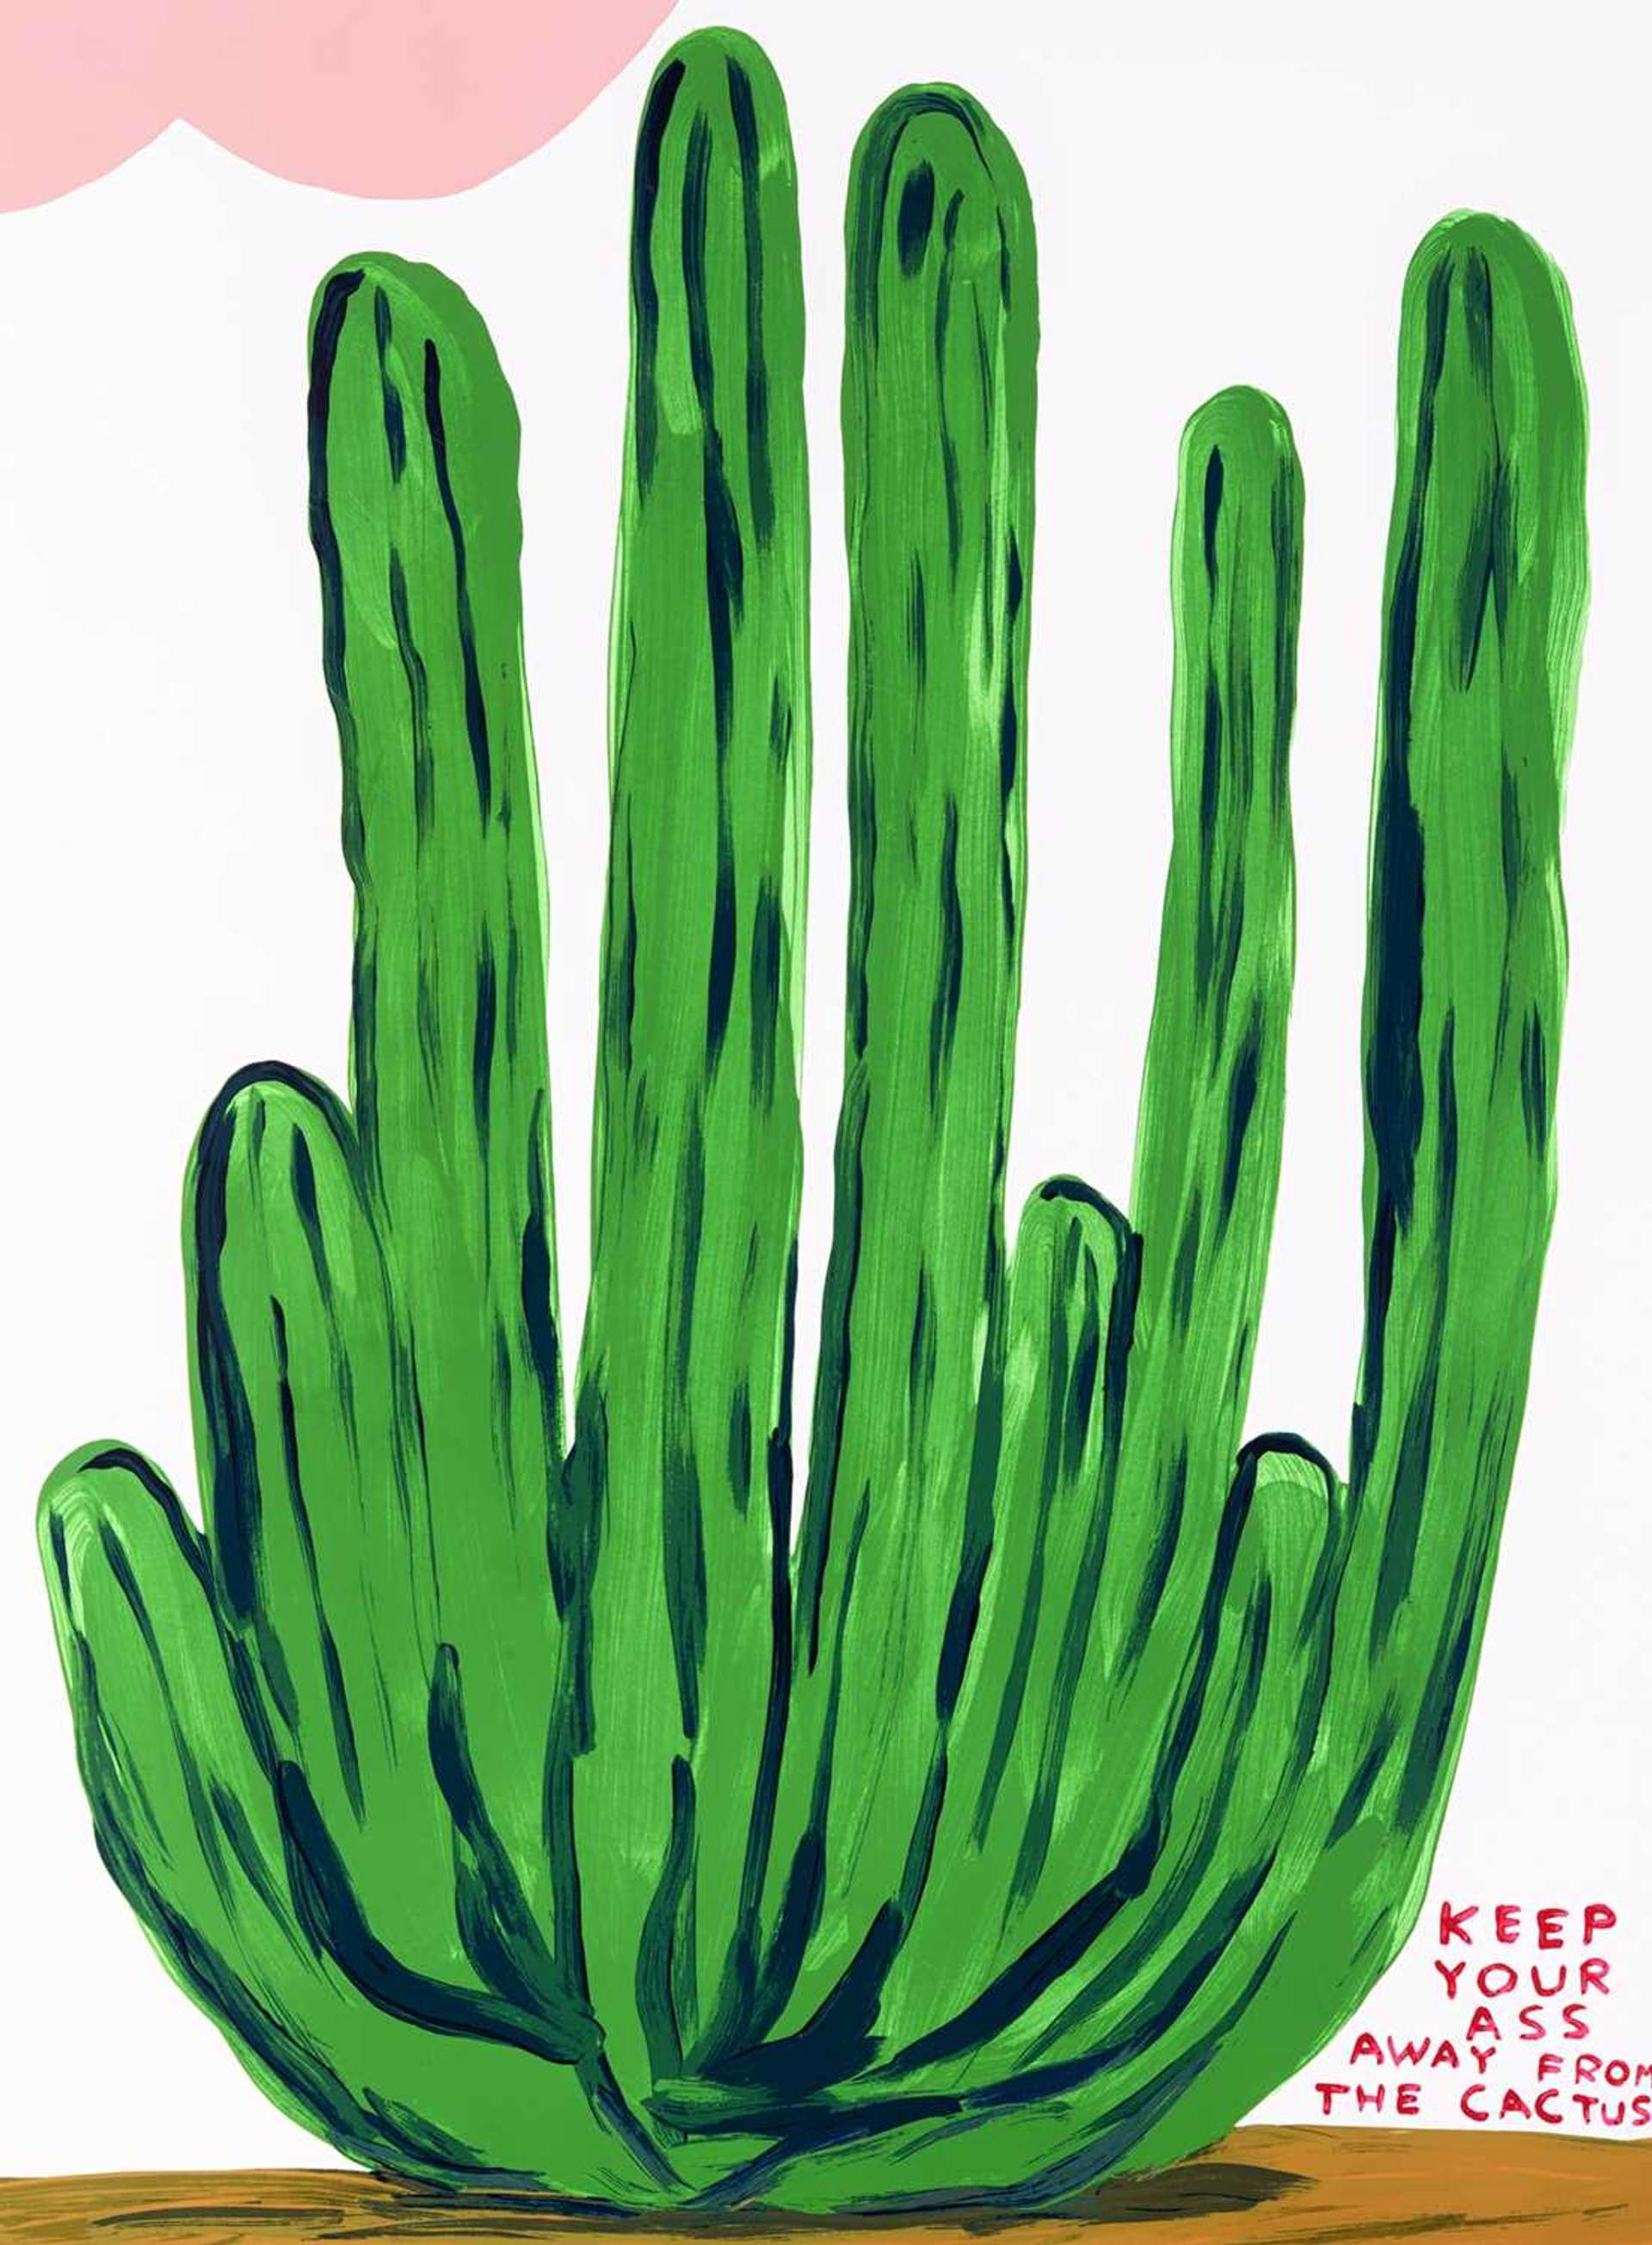 Keep Your Ass Away From The Cactus - Signed Print by David Shrigley 2020 - MyArtBroker